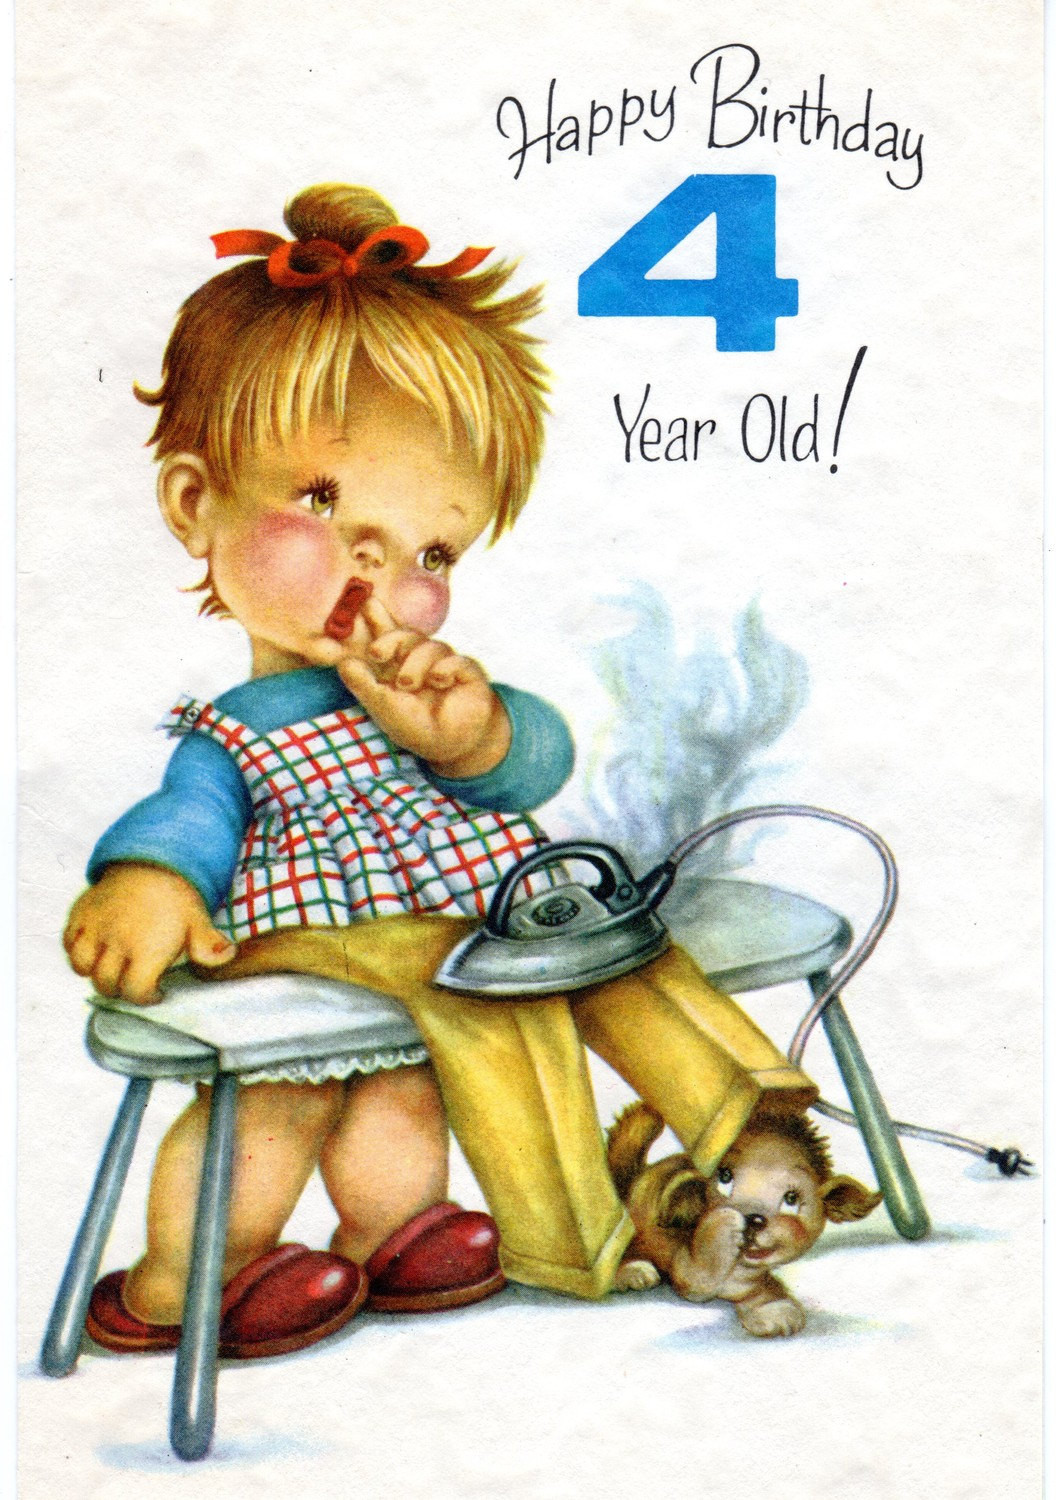 Birthday Wishes For 4 Year Old
 Vintage Birthday Greeting Card For Four 4 Year Old Child